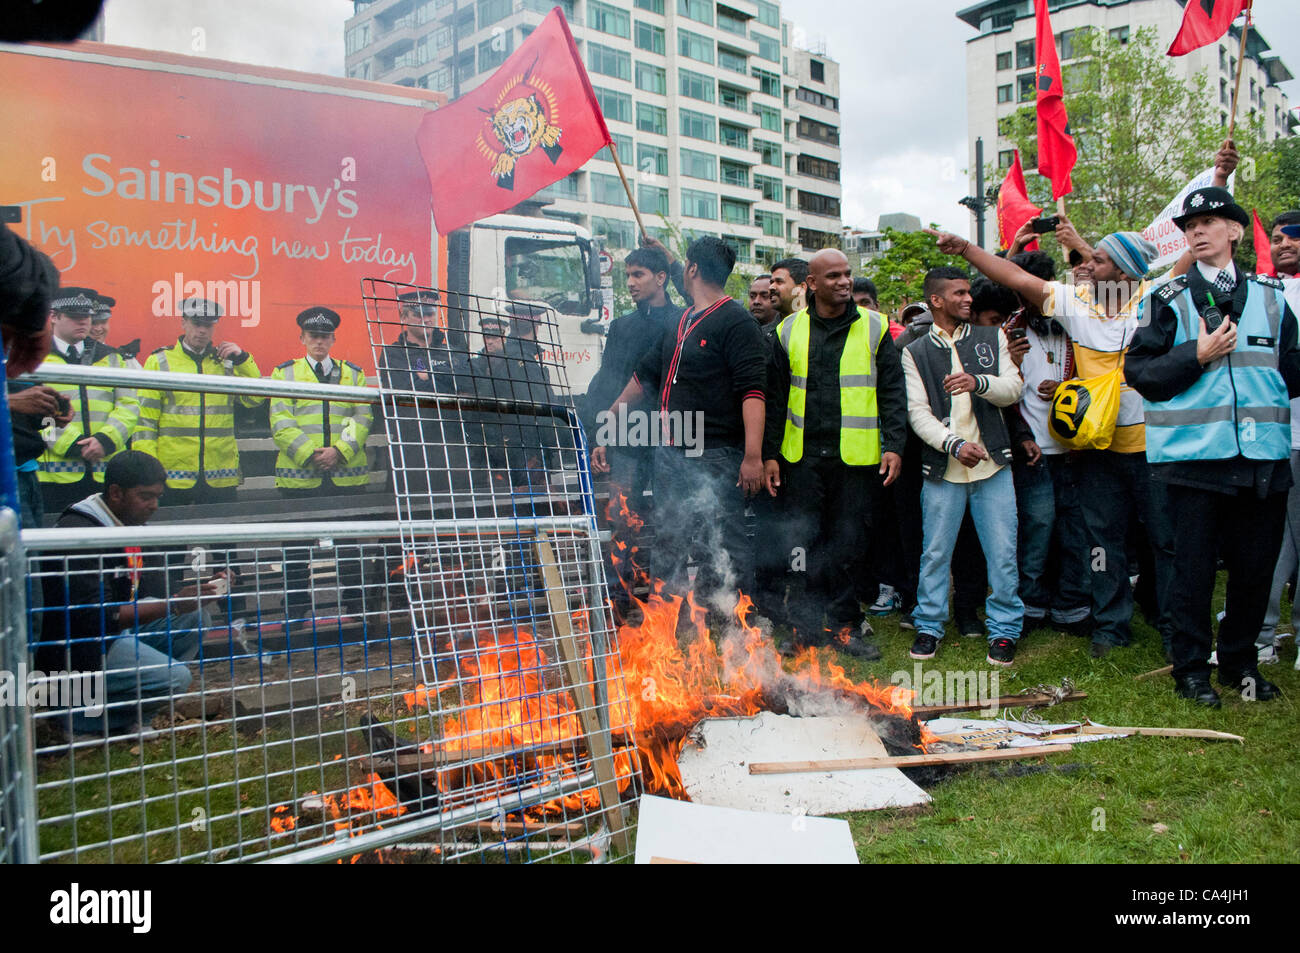 London, UK. 06/06/12. Sri Lankan protesters burn an effigy of their president, Mahinda Rajapaksa opposite the Hilton Hotel in Park Lane. Mahinda Rajapaksa has been accused of presiding over human rights abuses after allegations of war crimes by Sri Lankan armed Stock Photo